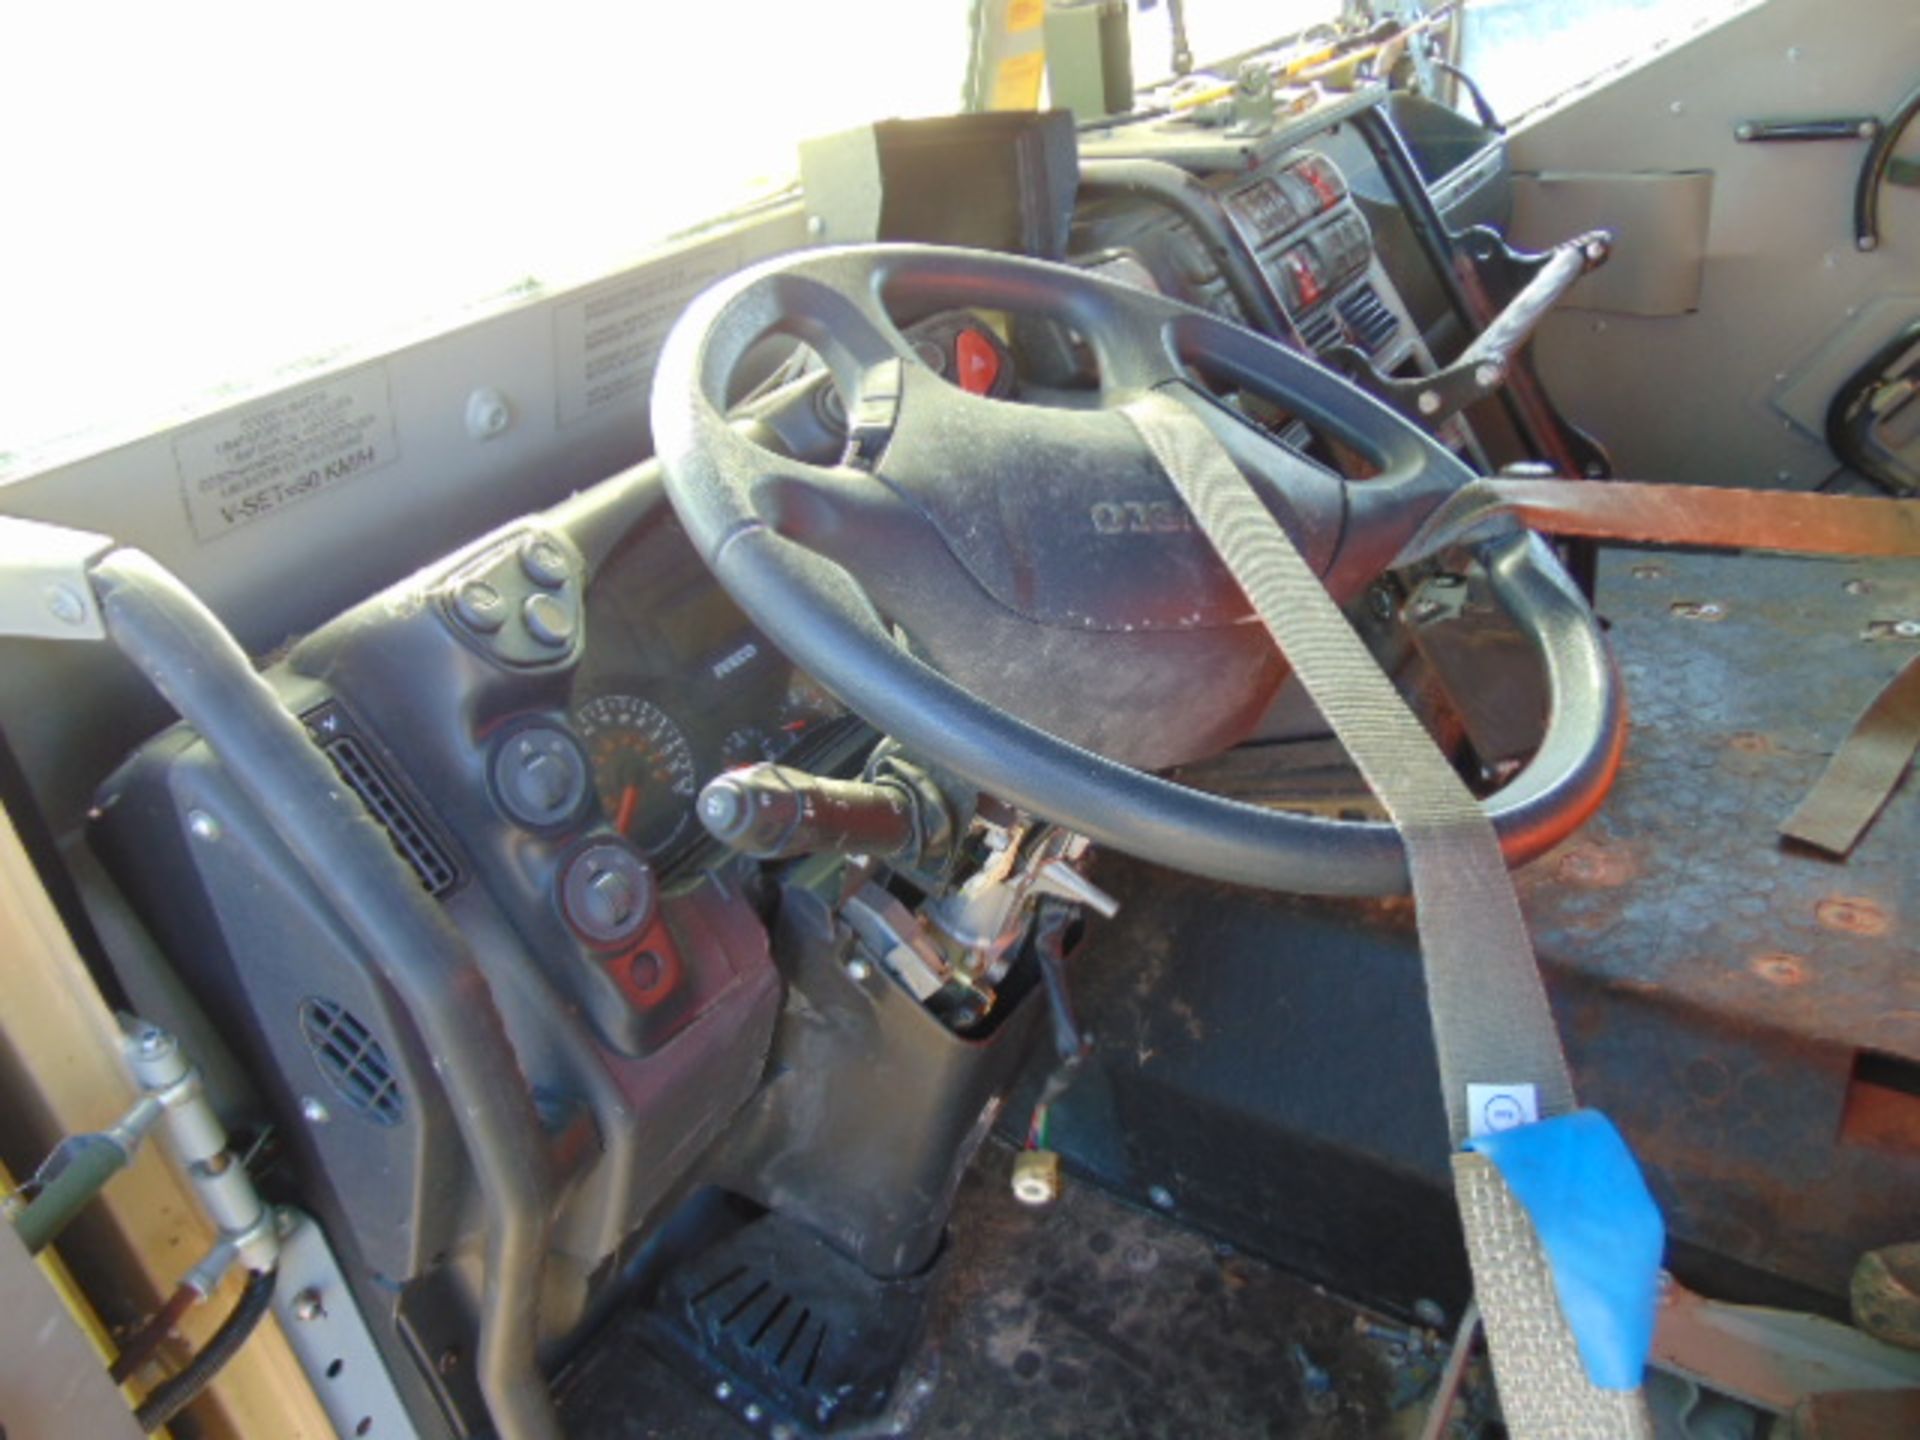 Damage Repairable LHD Iveco Trakker 8x8 Self Loading Dump Truck (Protected) - Image 8 of 15